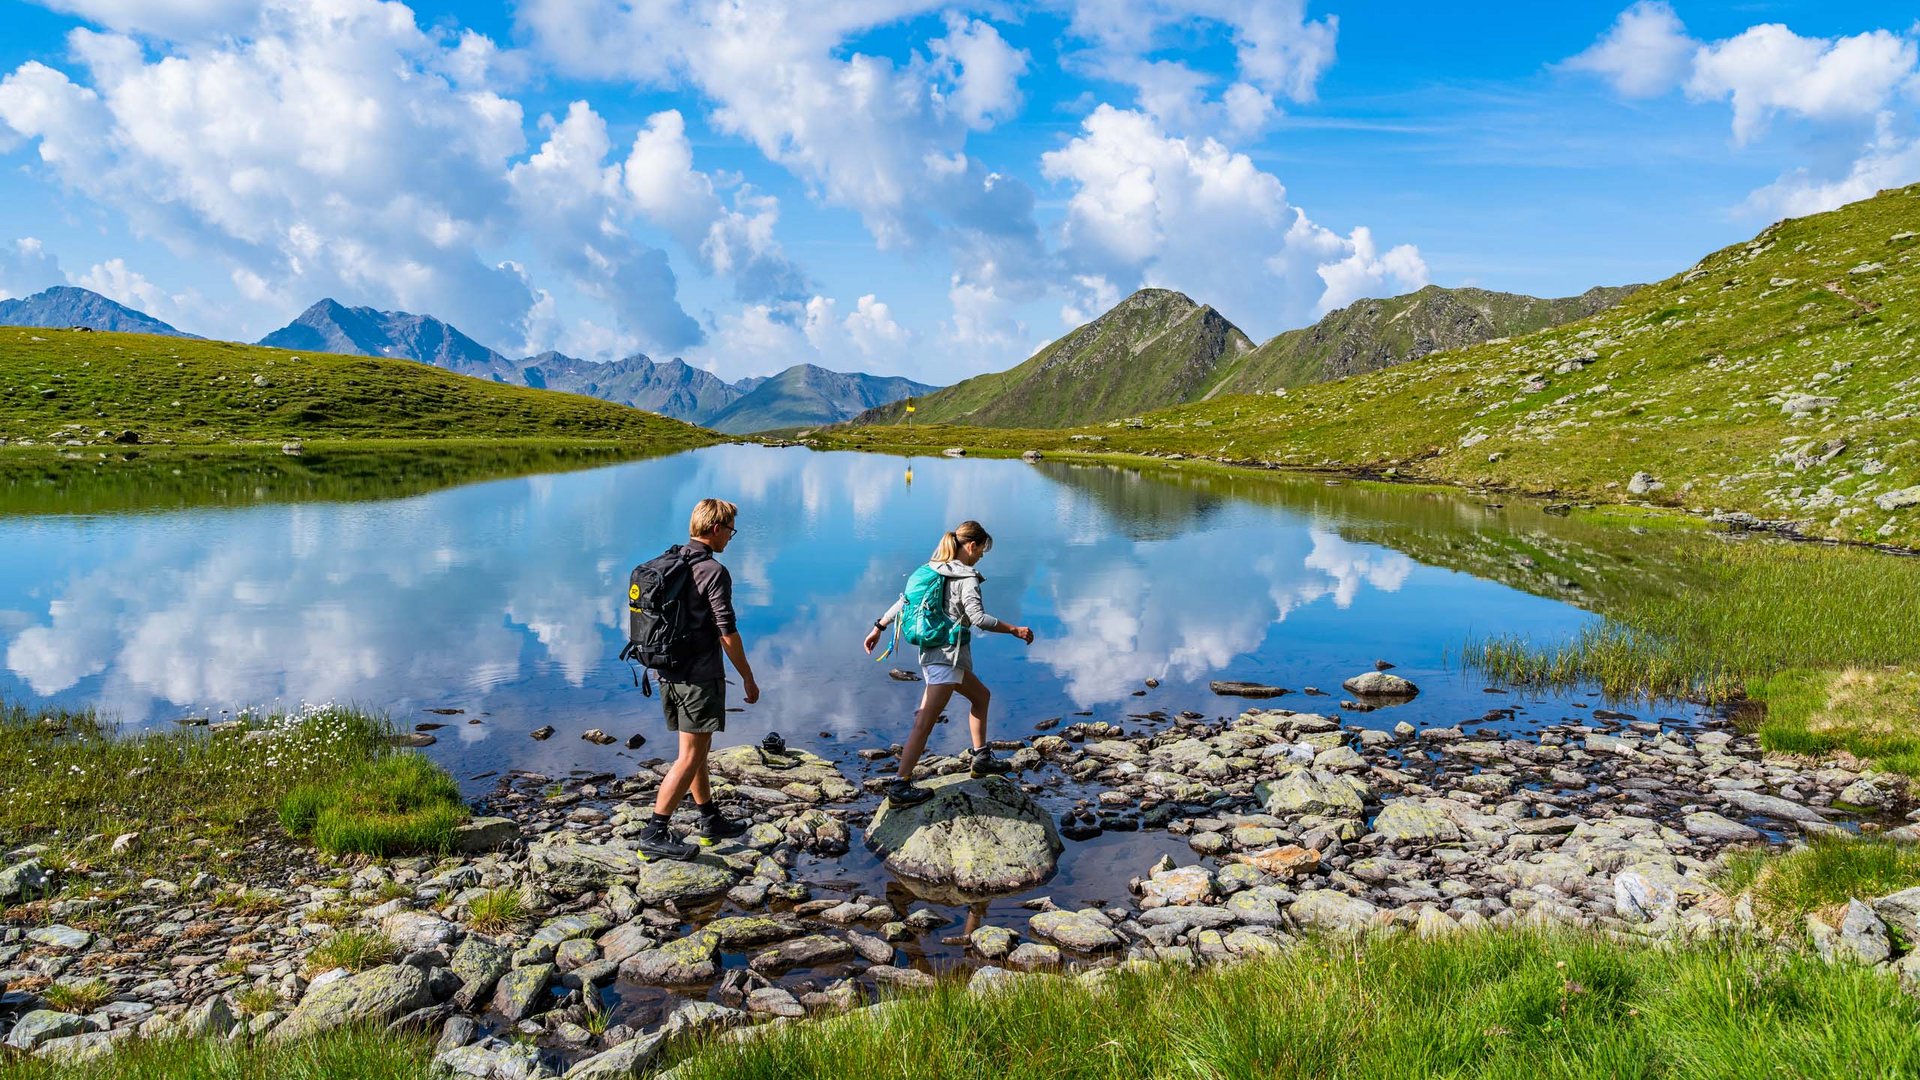 Hiking in Austria – the mountain is calling!